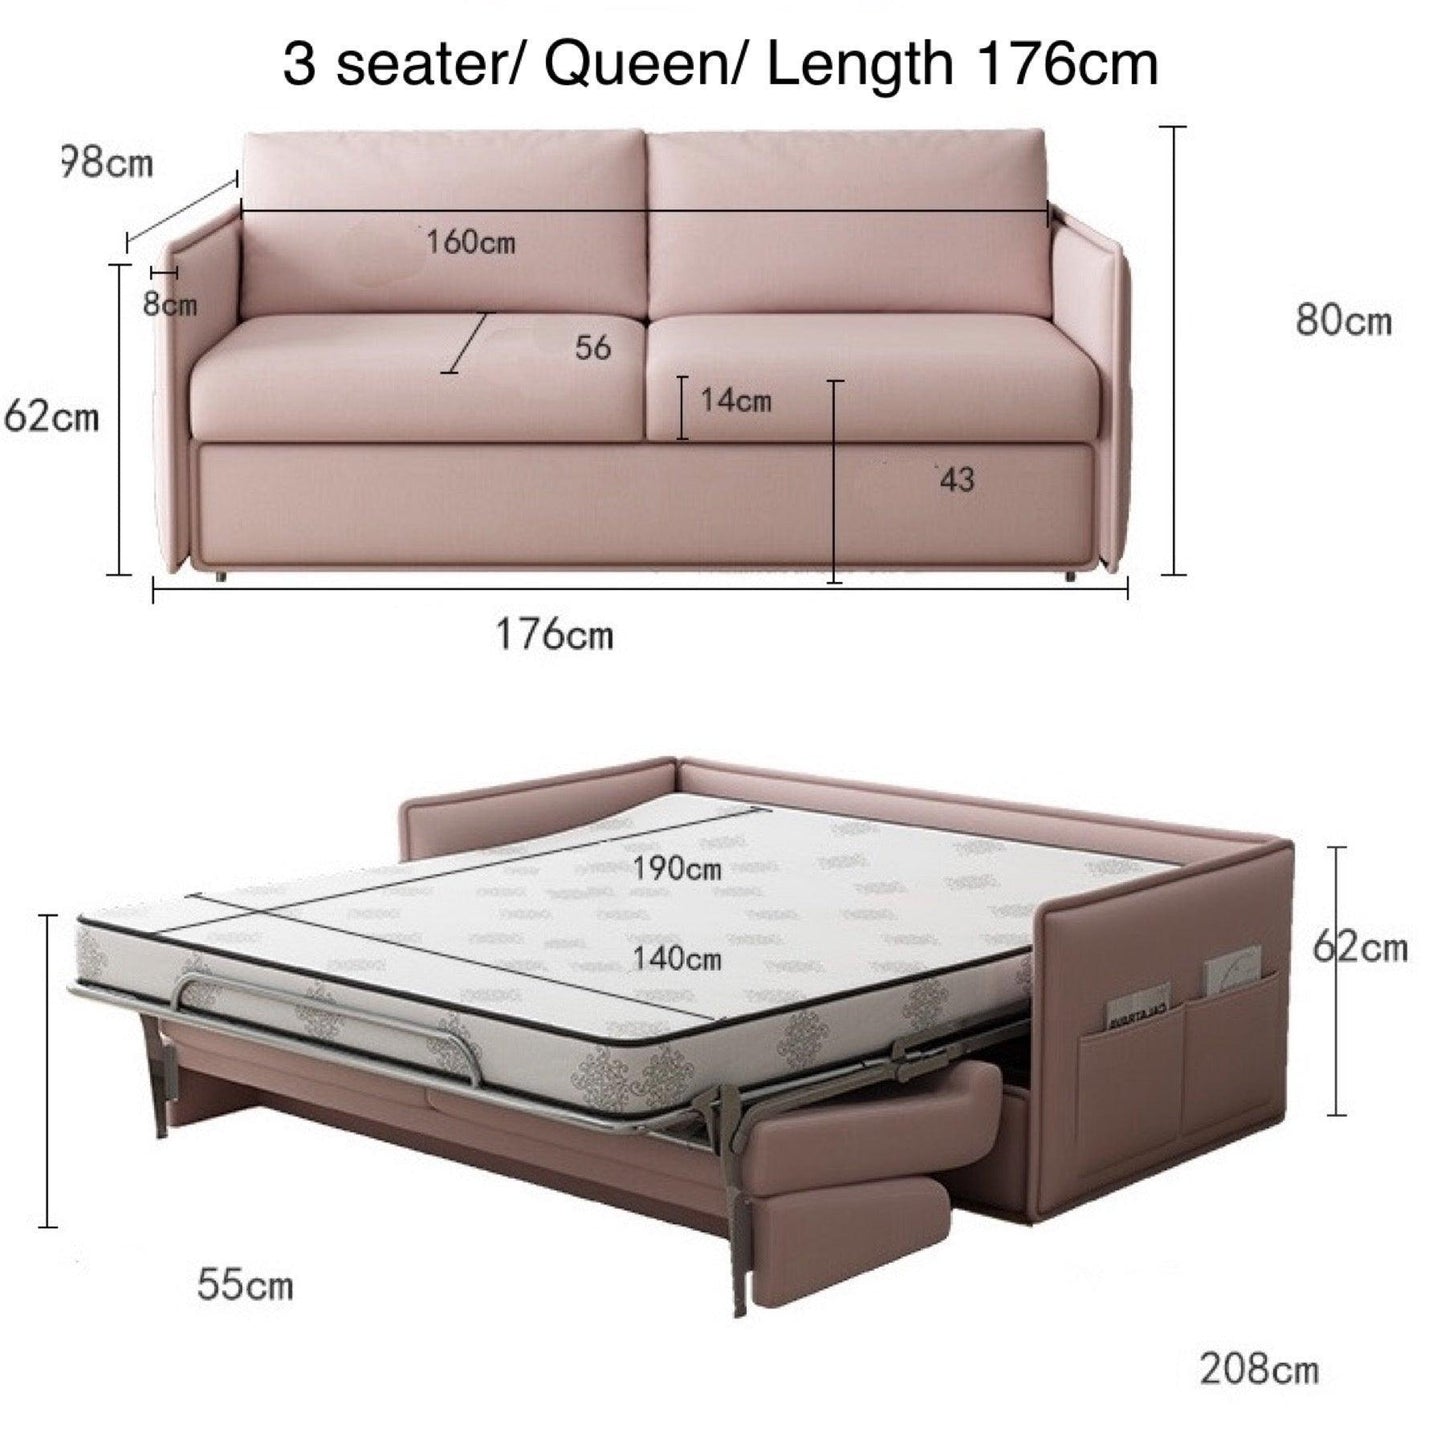 Home Atelier Cotton Linen Fabric / Queen Size/ Length 176cm / Pink Ariel Foldable Sofa Bed with Mattress